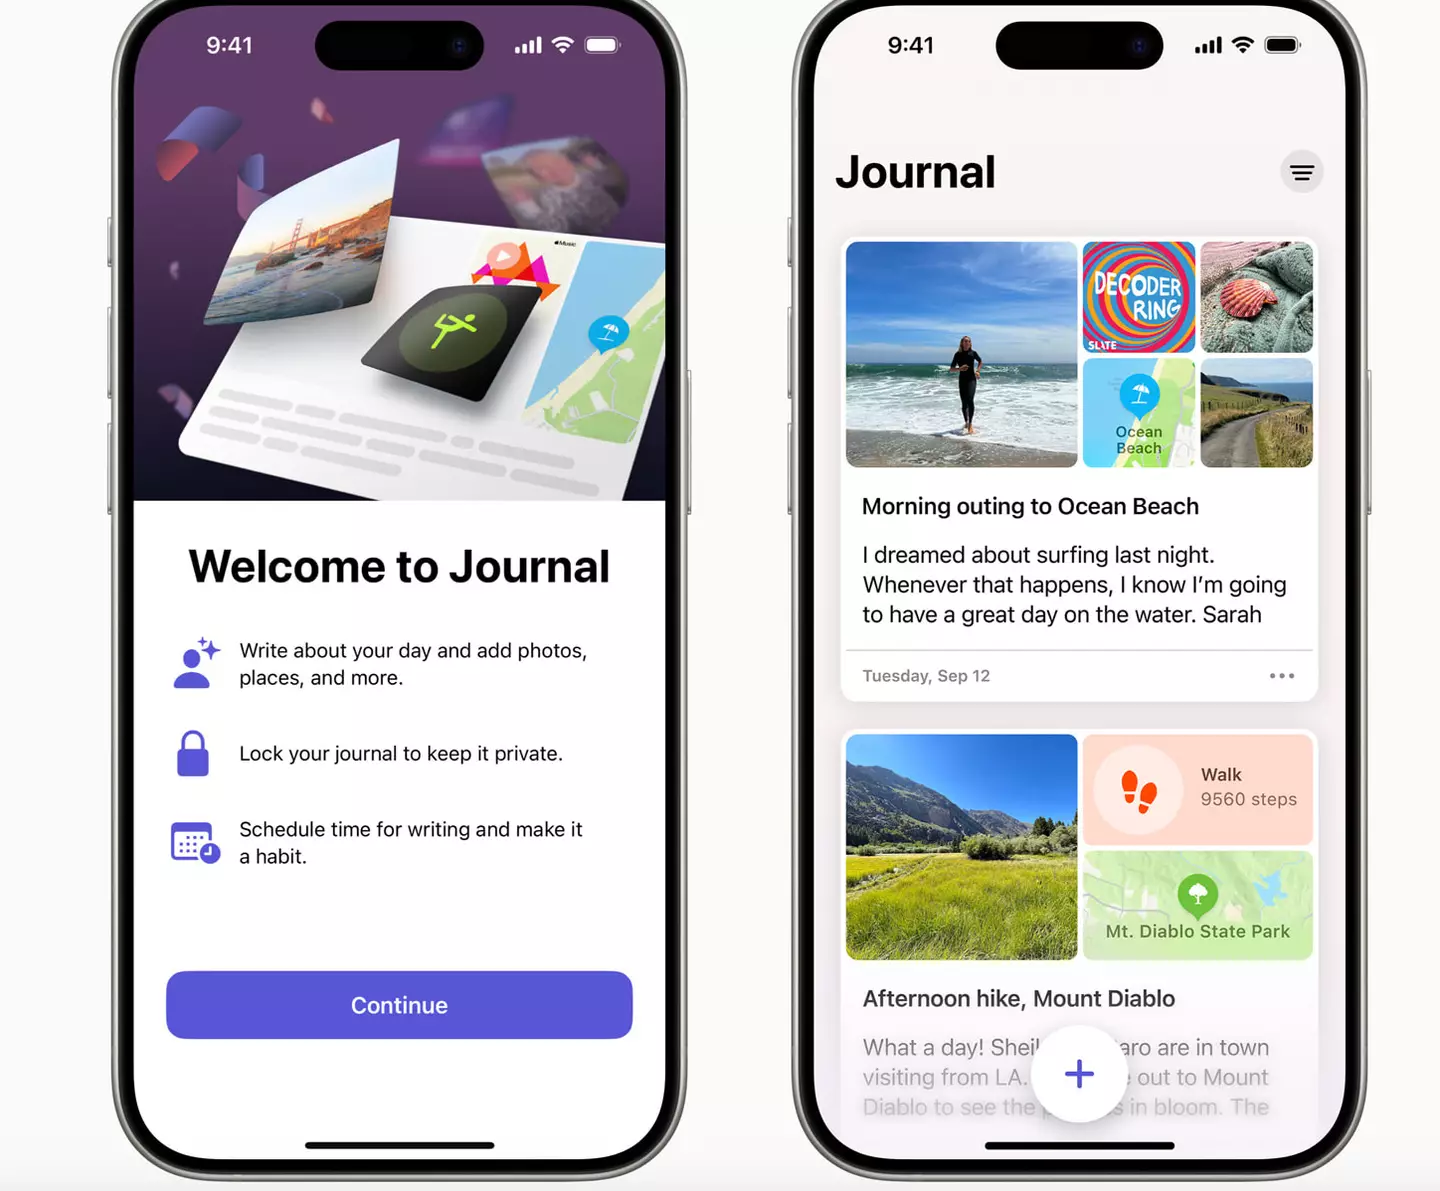 The Journal app is automatically downloaded with the update.